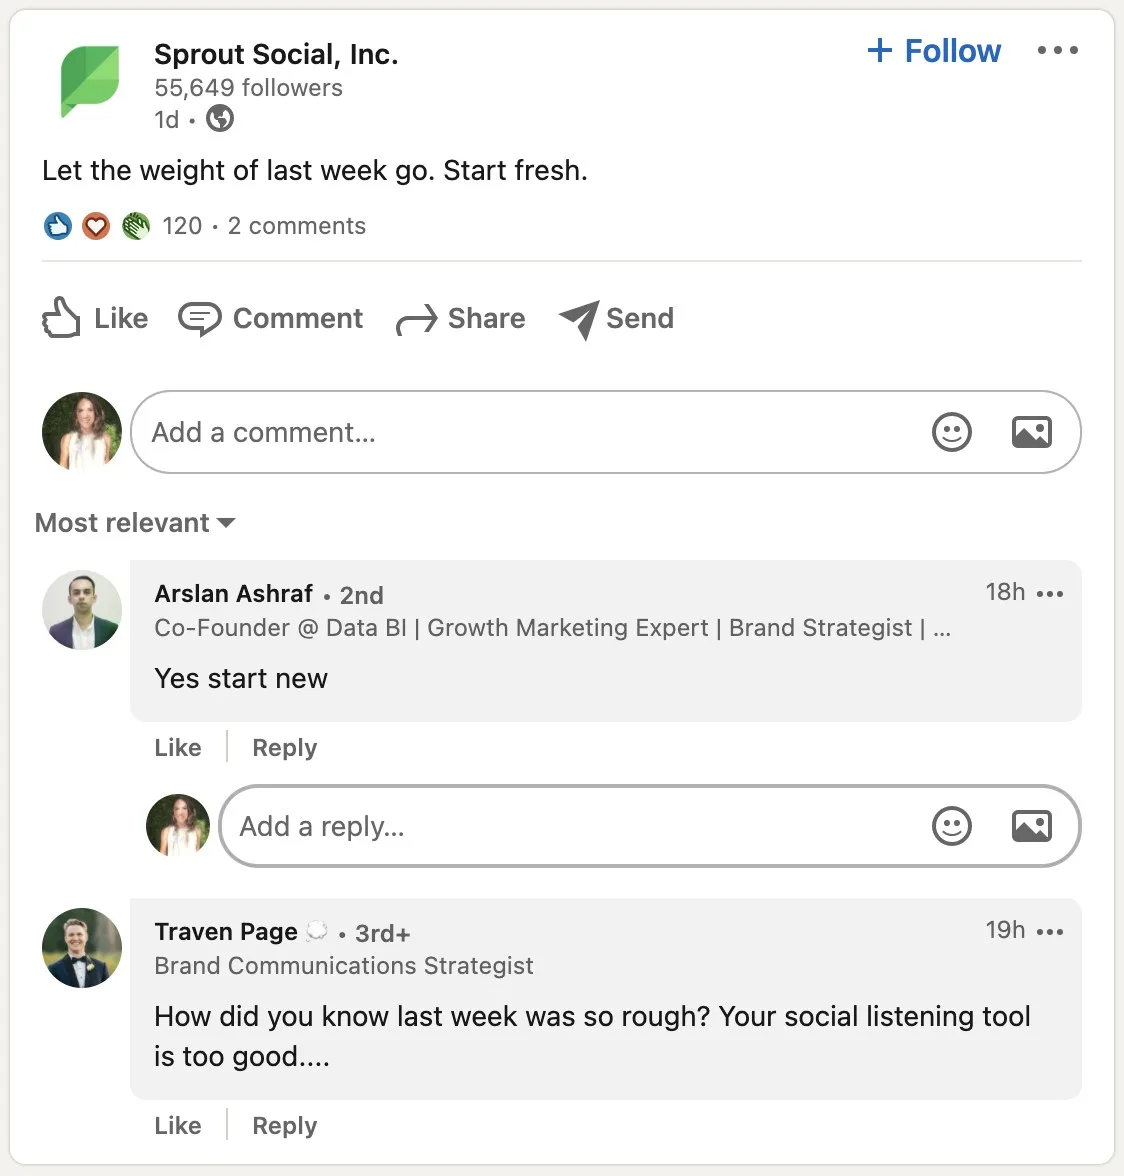 Responding to comments and queries from Facebook Business Page followers entails engaging with the audience by addressing their comments, questions, and concerns.